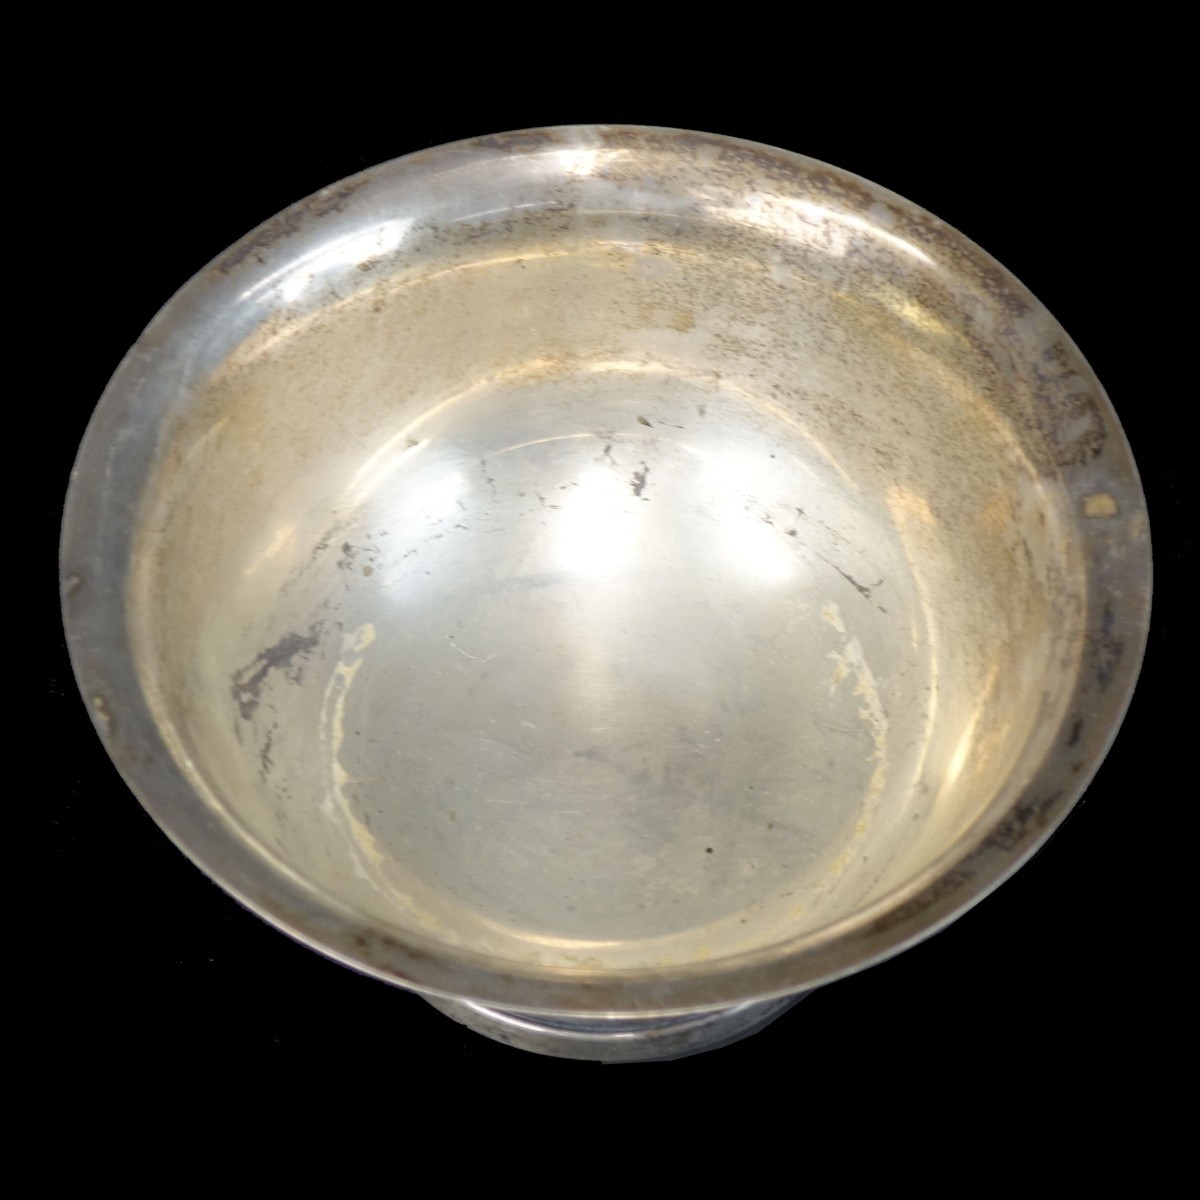 Poole Sterling Silver Bowl